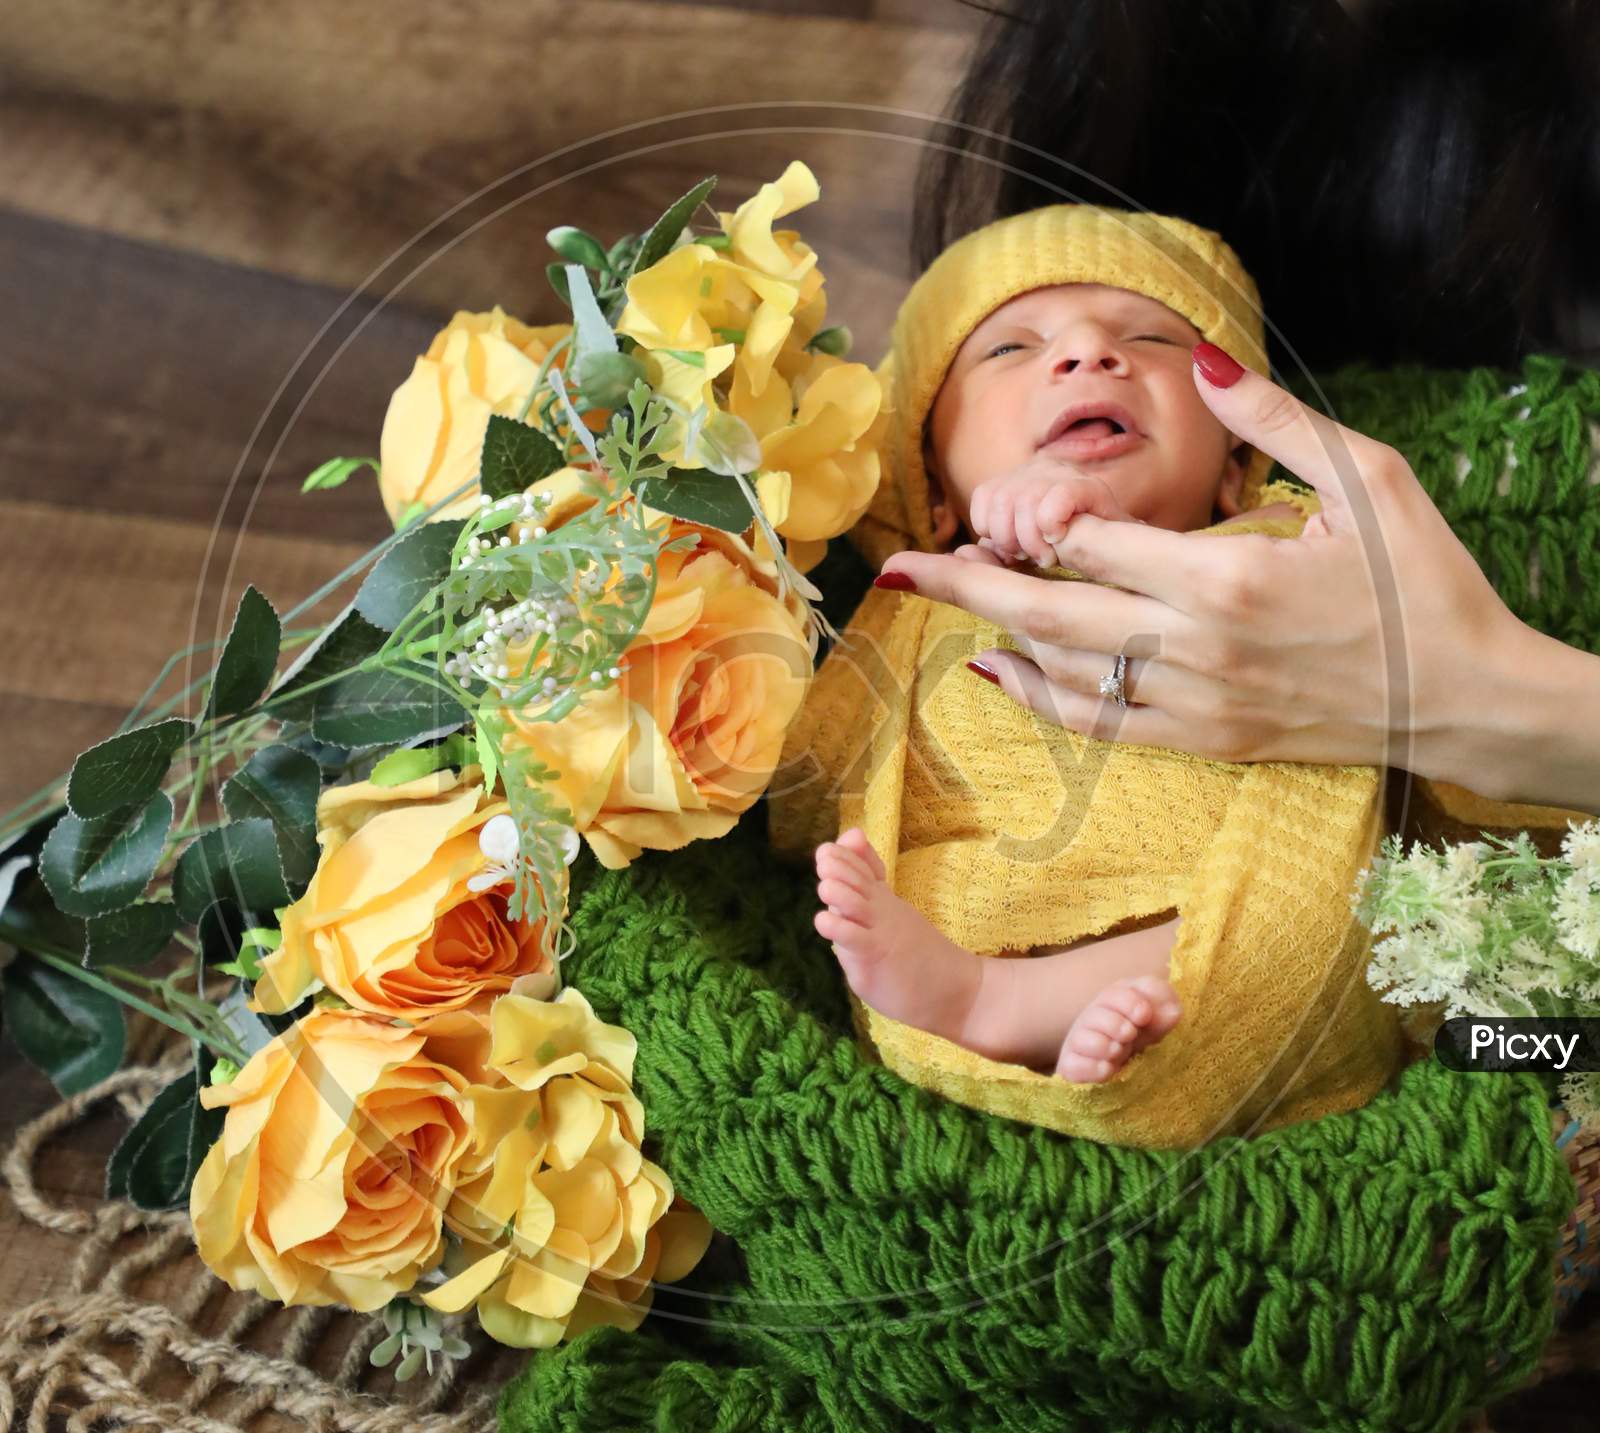 Cute Girl Covered With Yellow Blanket And Head Scarf Lying On Green Knit Textile Yellow Flowers